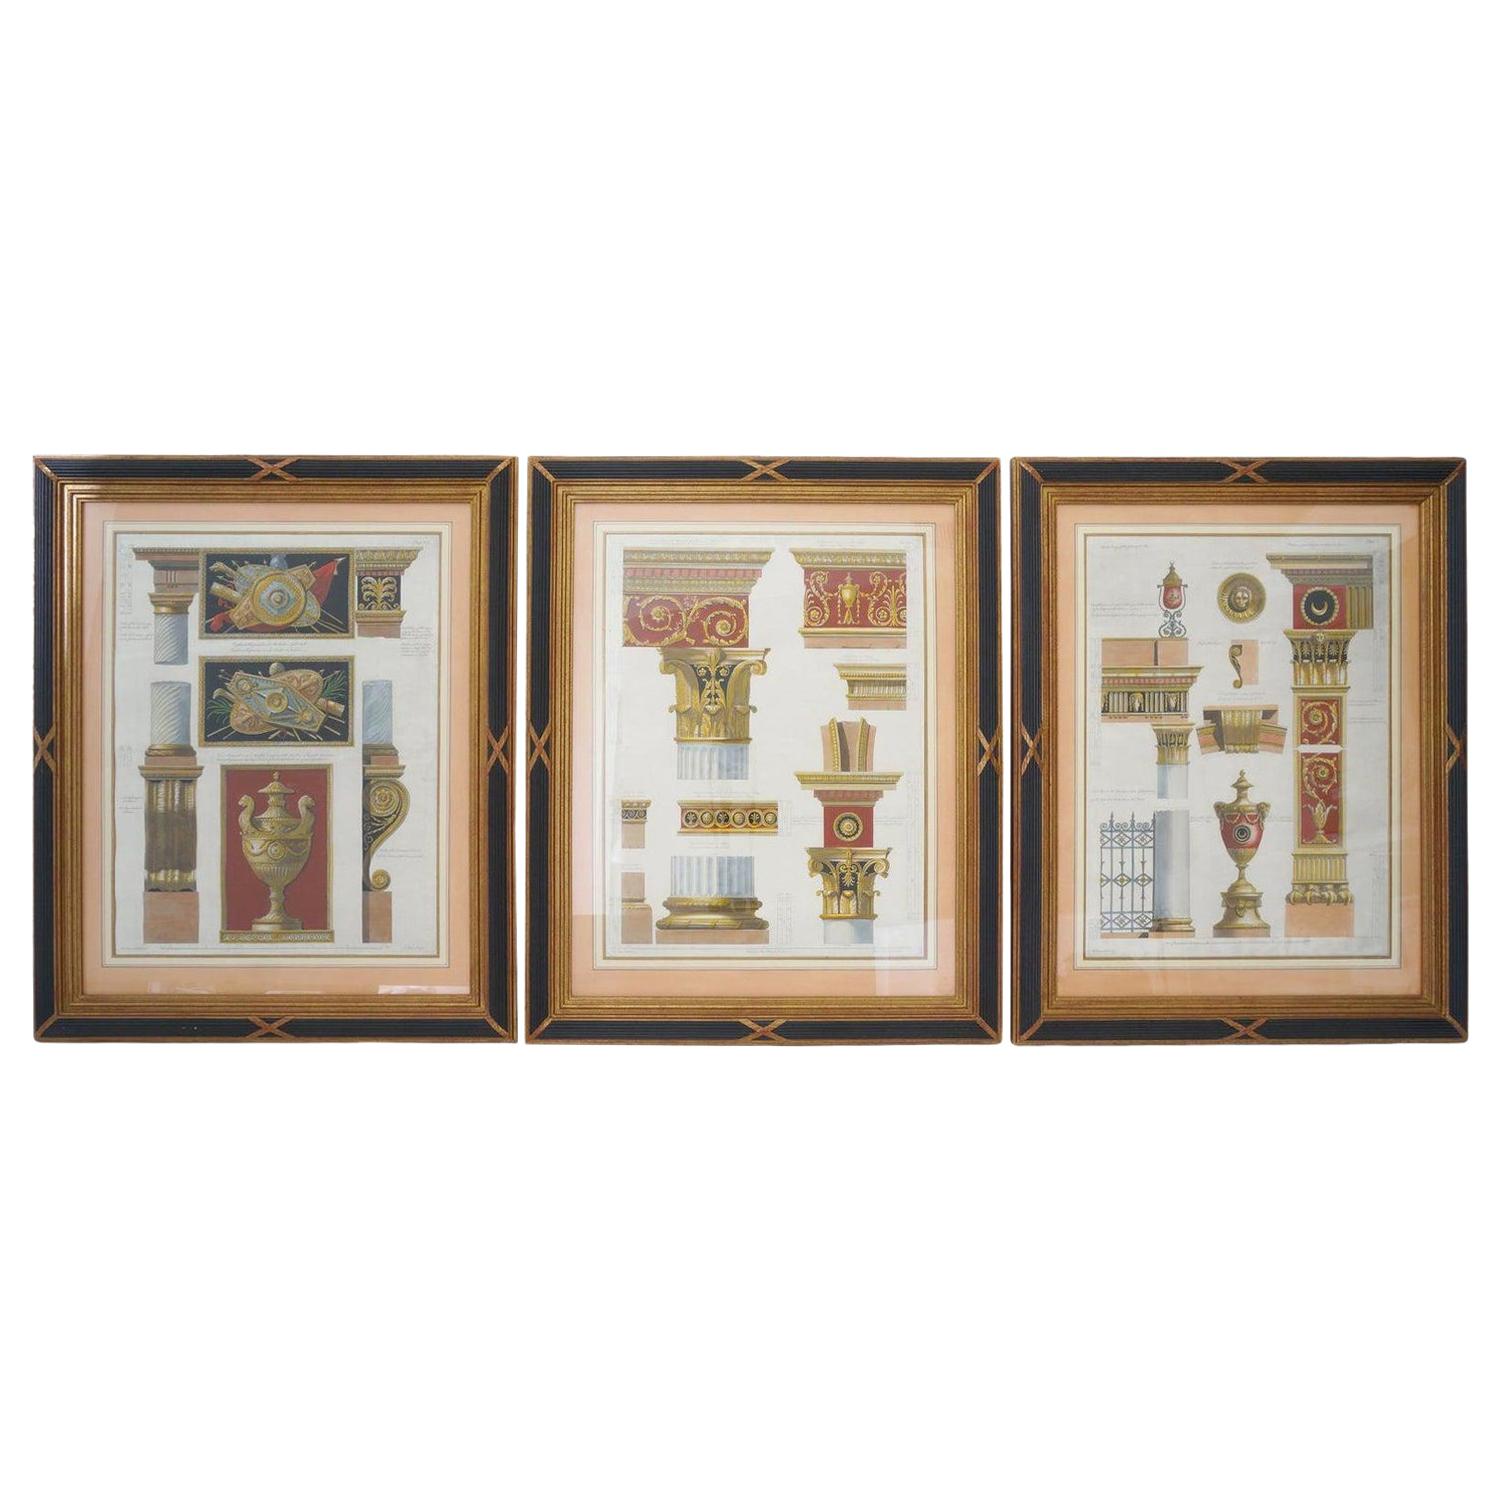 Set of Three Neo Classsical Architectural Prints